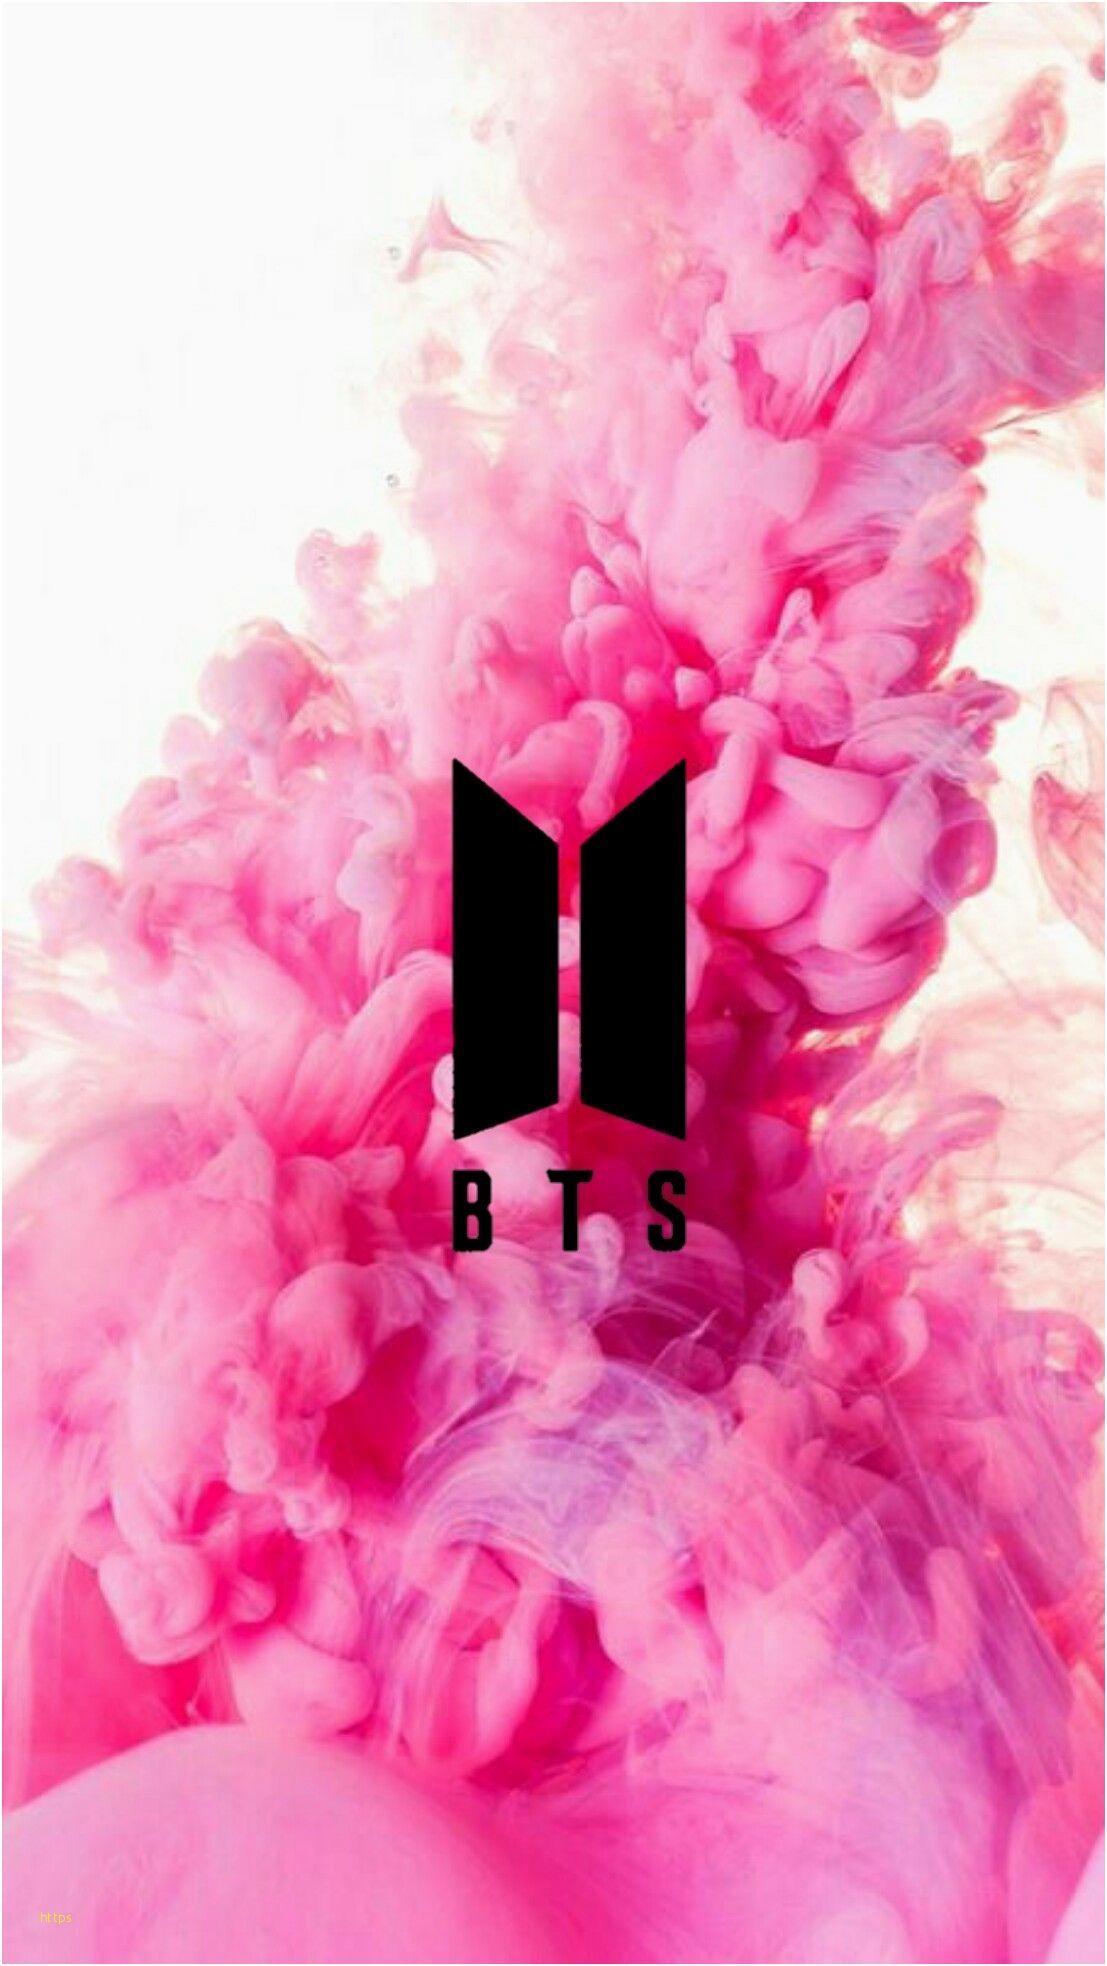 Bts Logo Iphone Wallpapers Top Free Bts Logo Iphone Backgrounds Wallpaperaccess